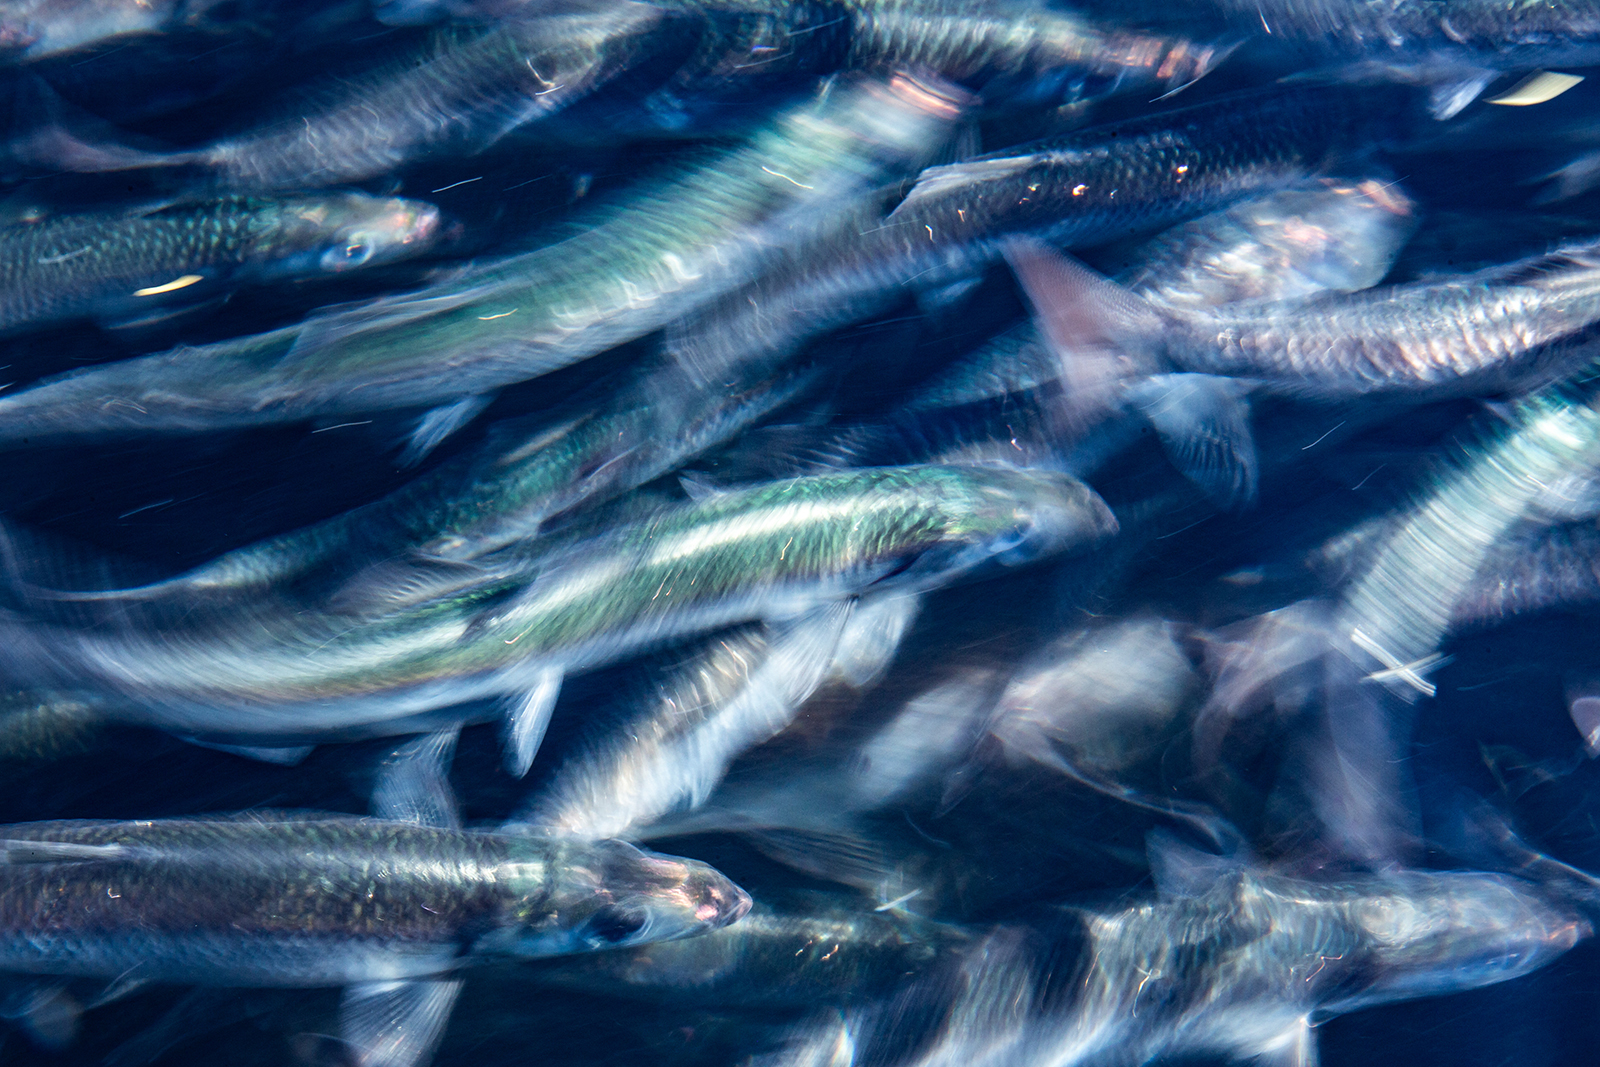 Close-up photo of a school of Pacific herring.